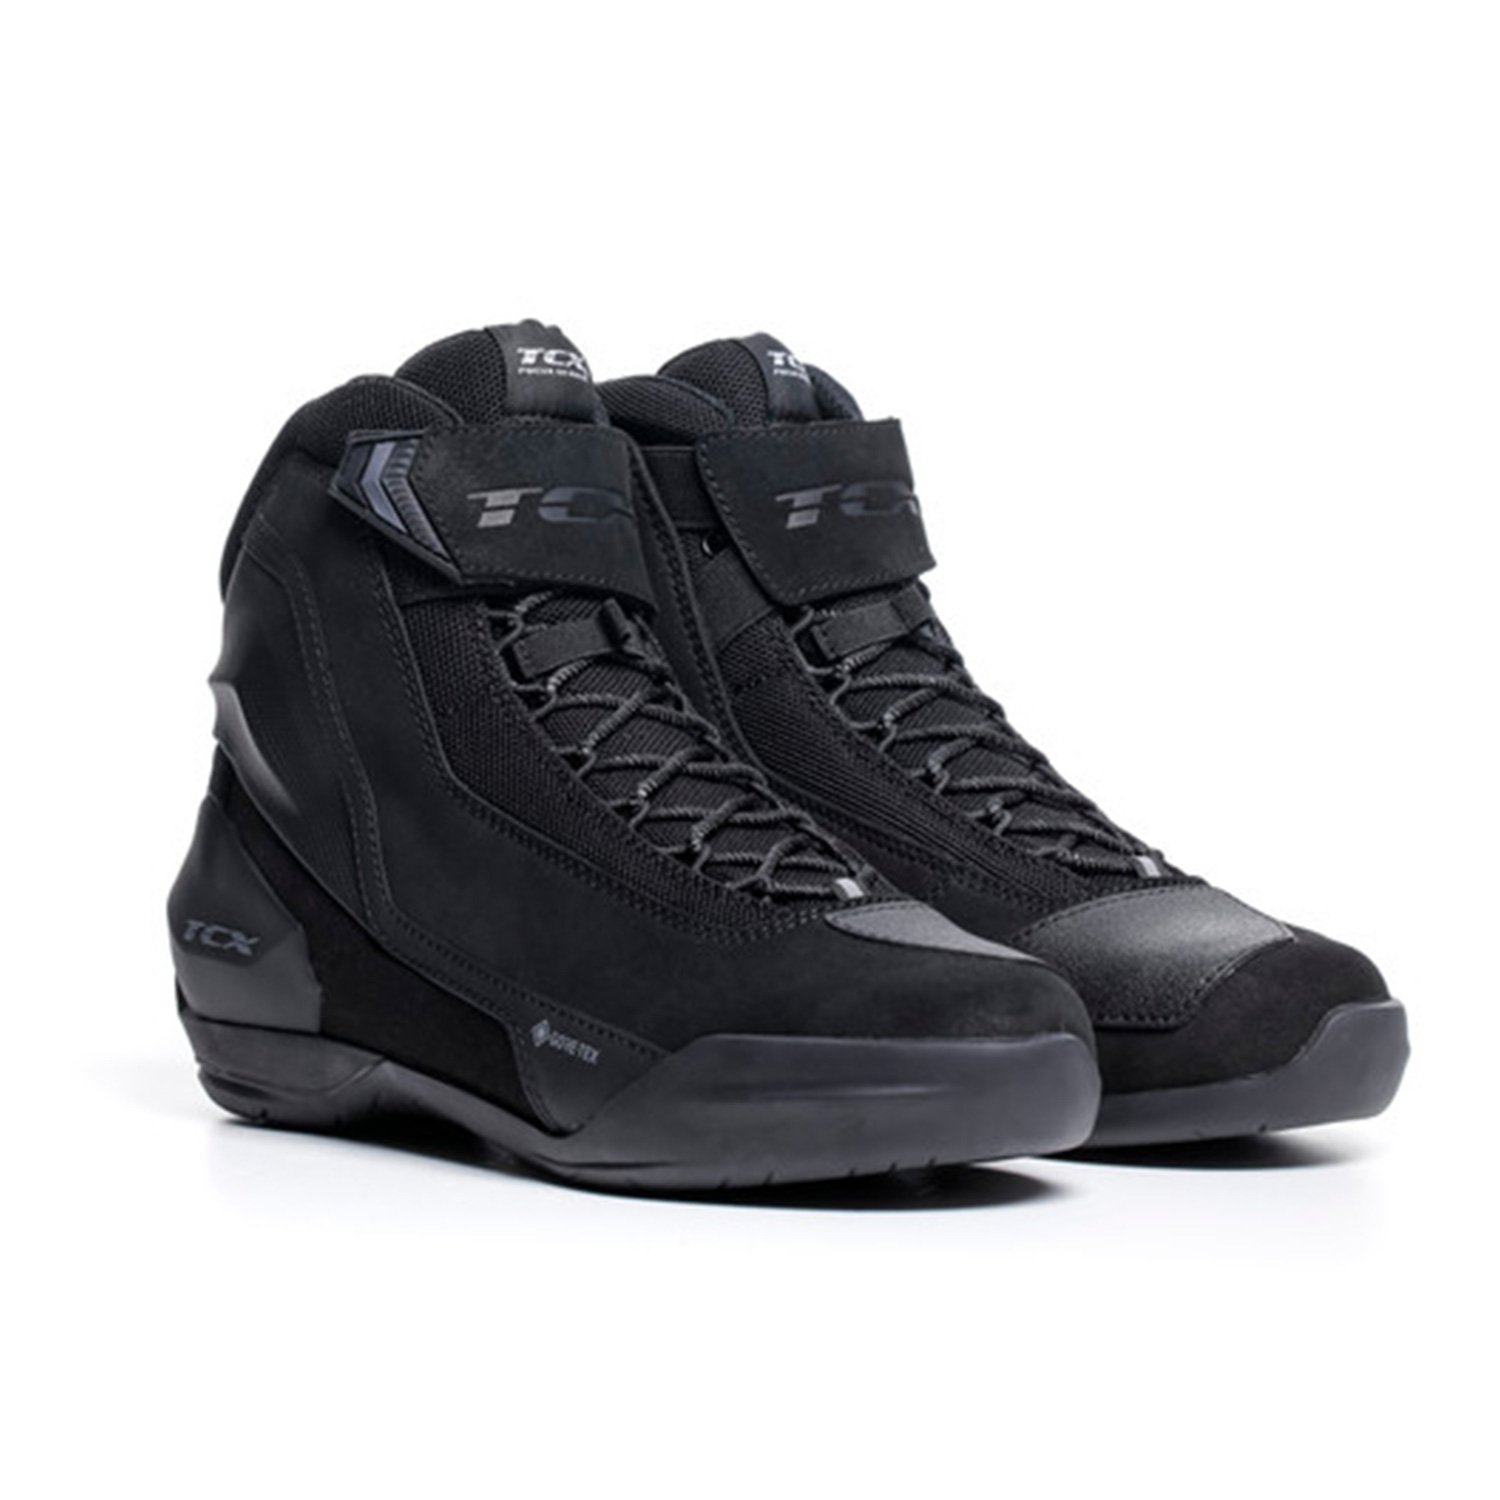 Image of TCX Jupiter 5 Gore-Tex Noir Chaussures Taille 38